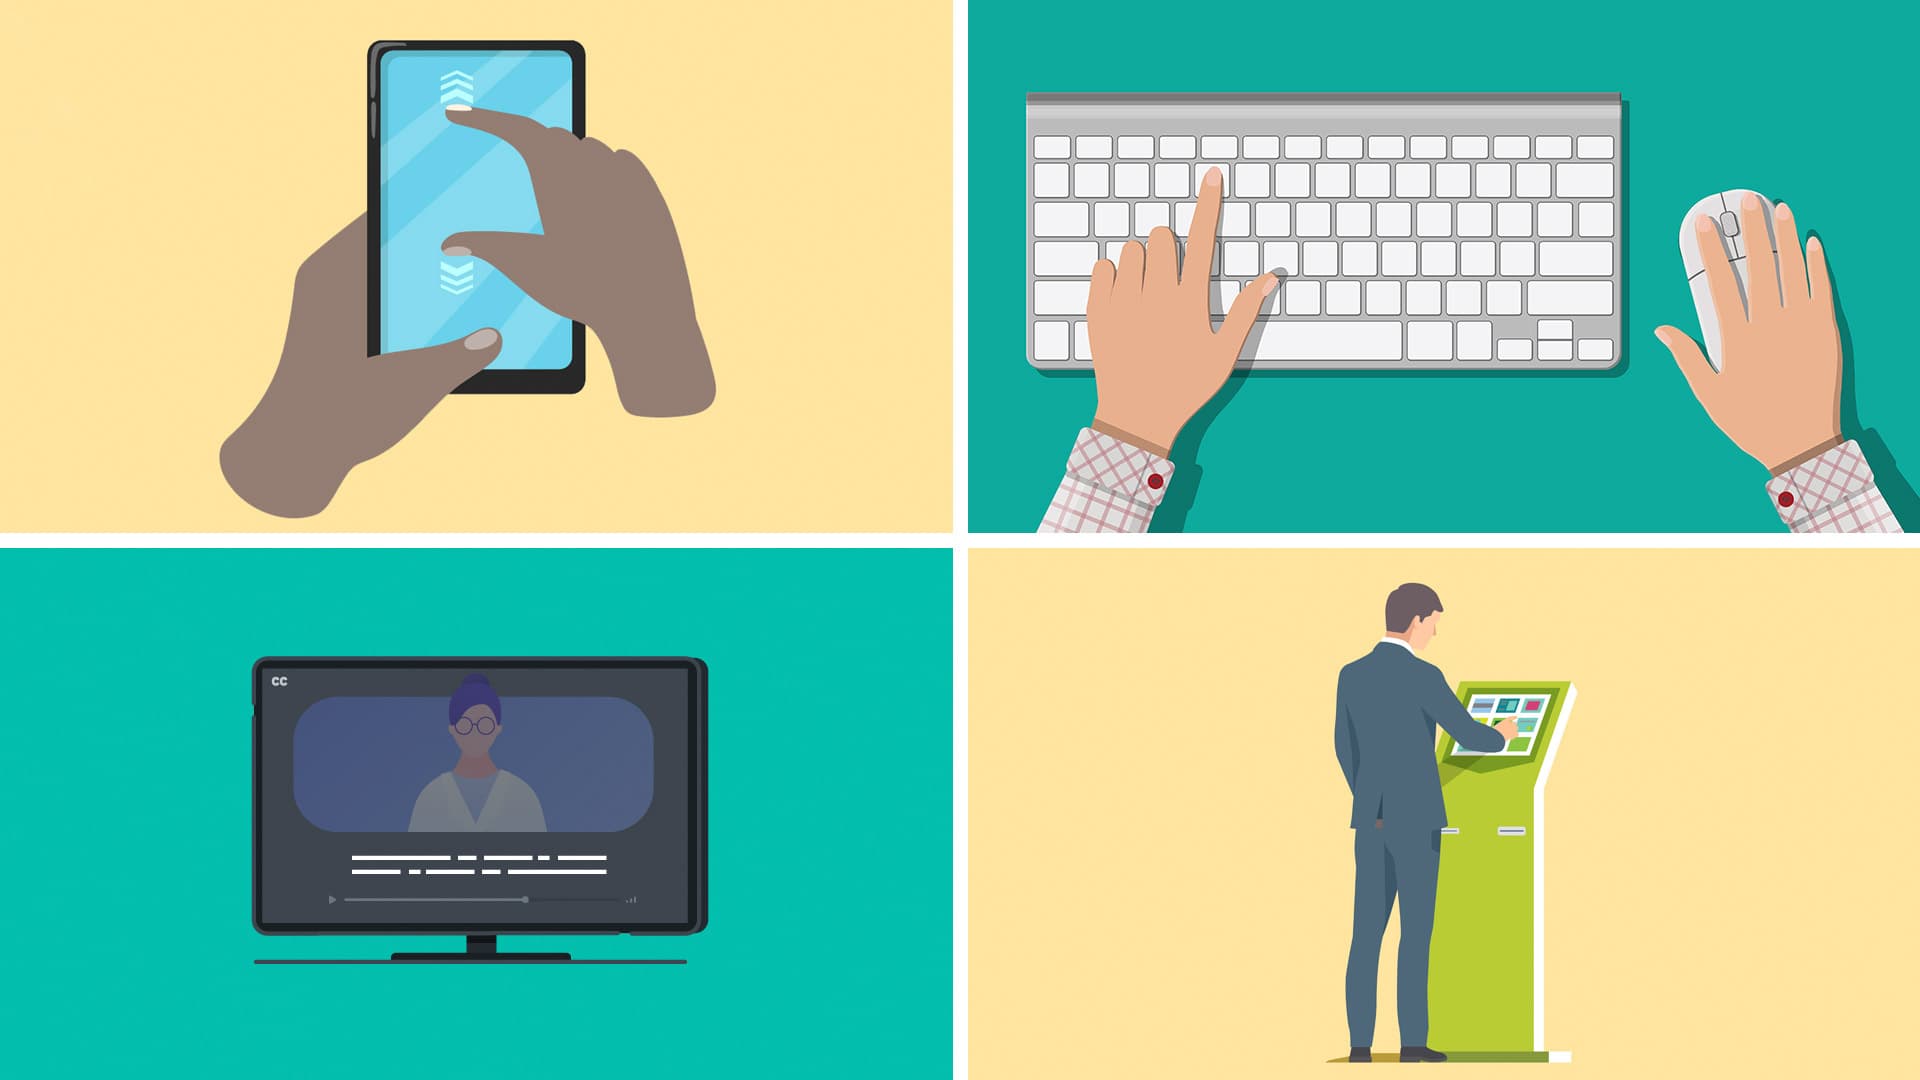 Illustrations of touchscreen, keyboard, video and kiosk